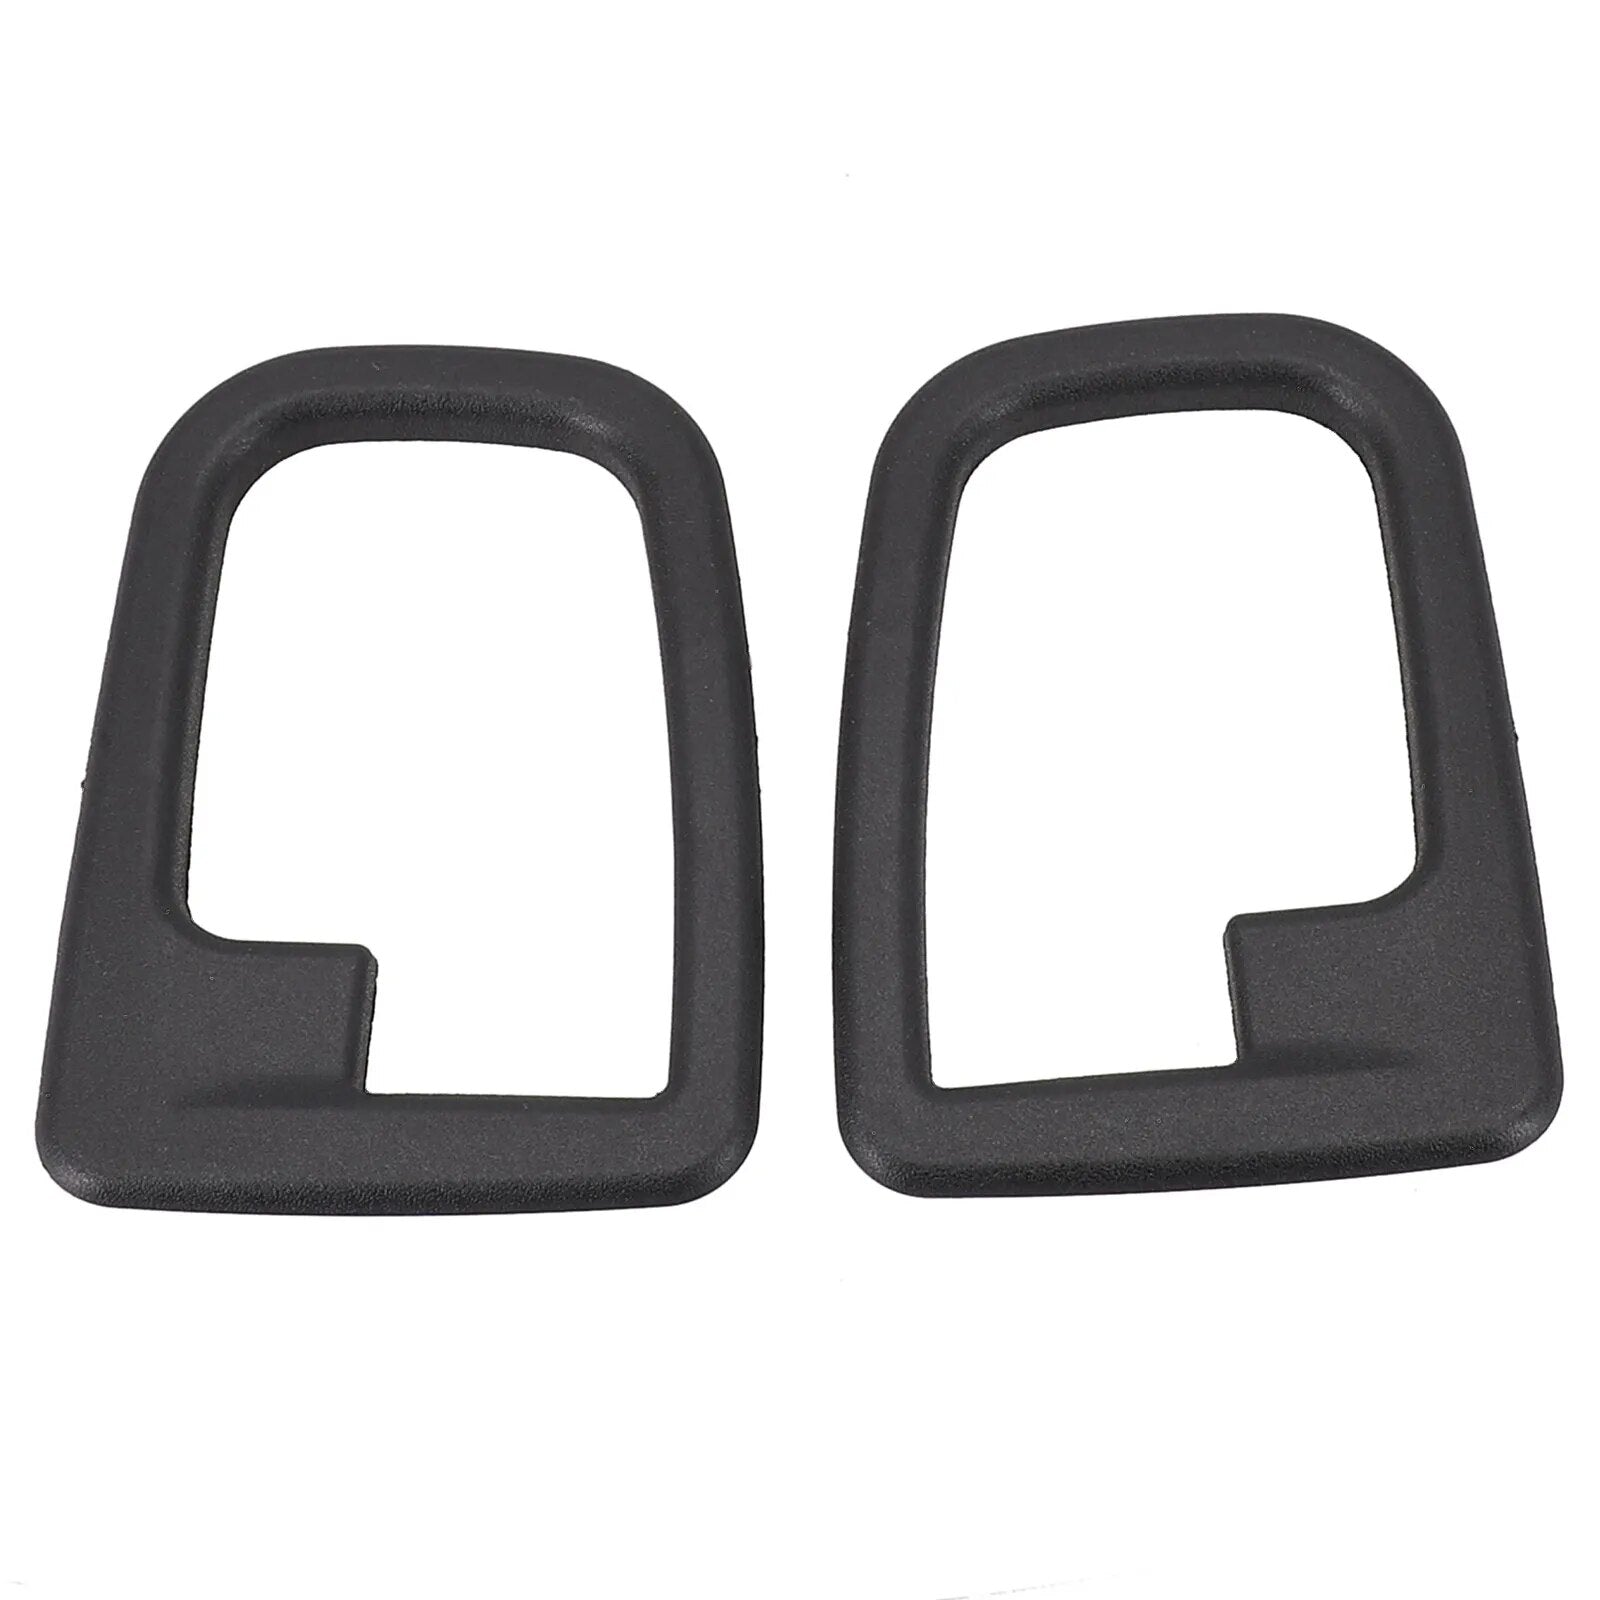 2x Left & Right Car Interior Door Handle Frame Black ABS Interior-Replacement Parts For BMW 3 Series E36 1992-1999/ Z3 1996-2002